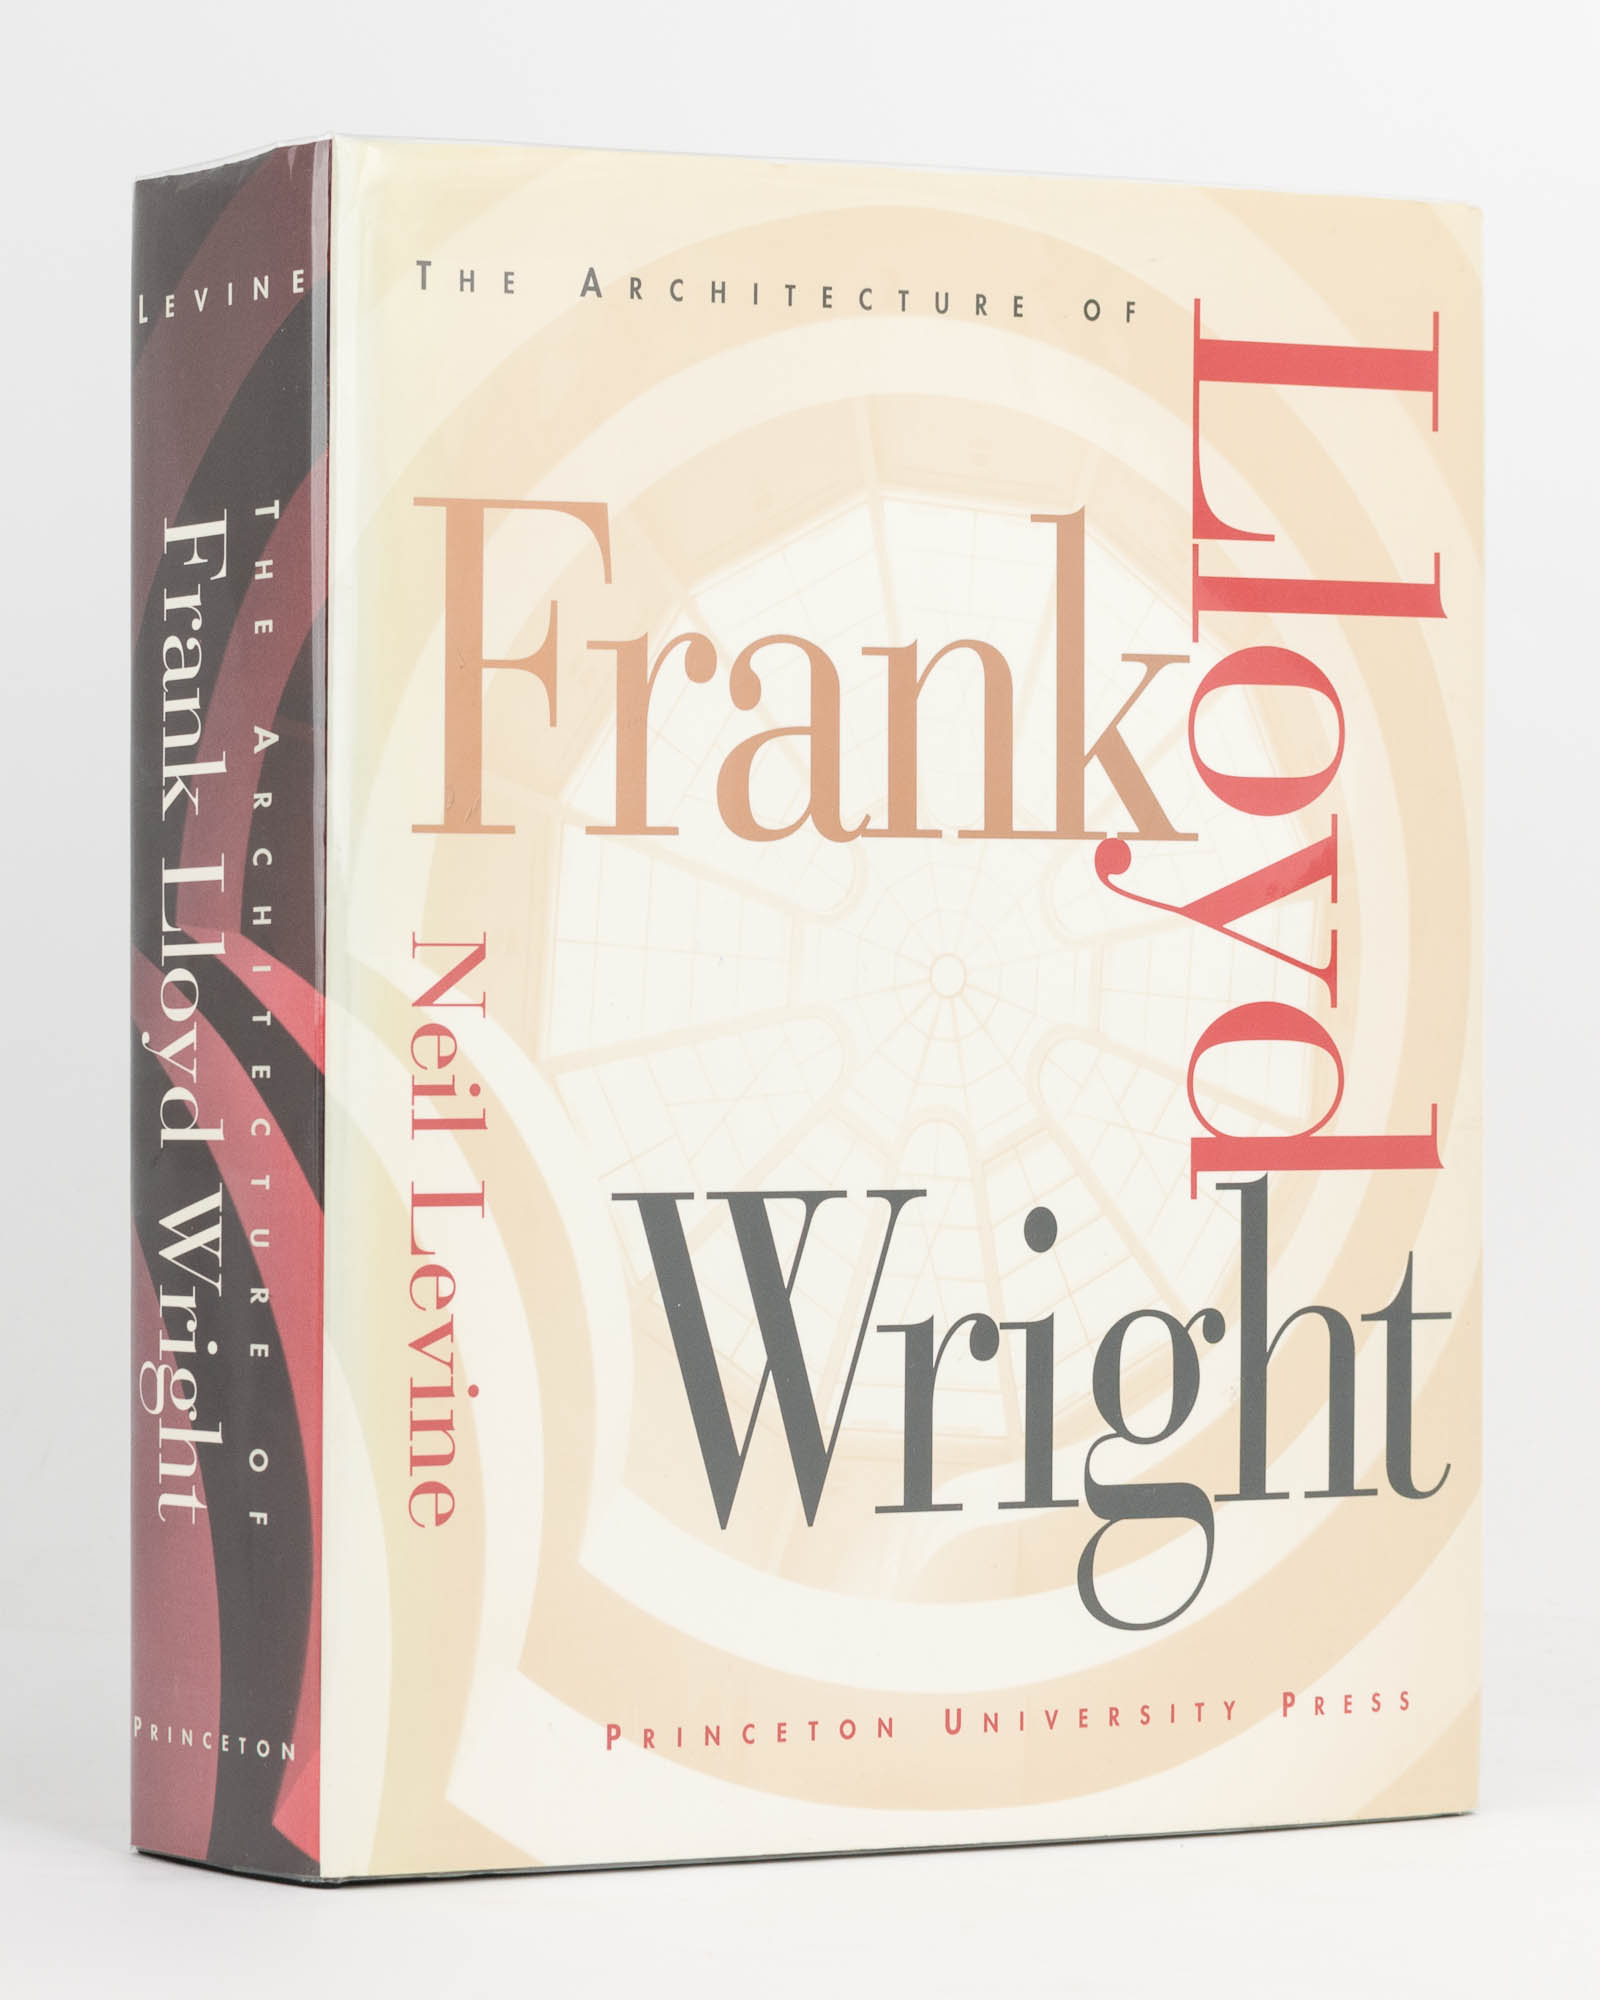 Wright　Michael　Lloyd].　of　Treloar　Neil:　First　Booksellers　(1996)　Fine　[WRIGHT,　LEVINE,　Frank　The　Edition.　by　Lloyd　Architecture　ANZAAB/ILAB　Frank　Hardcover